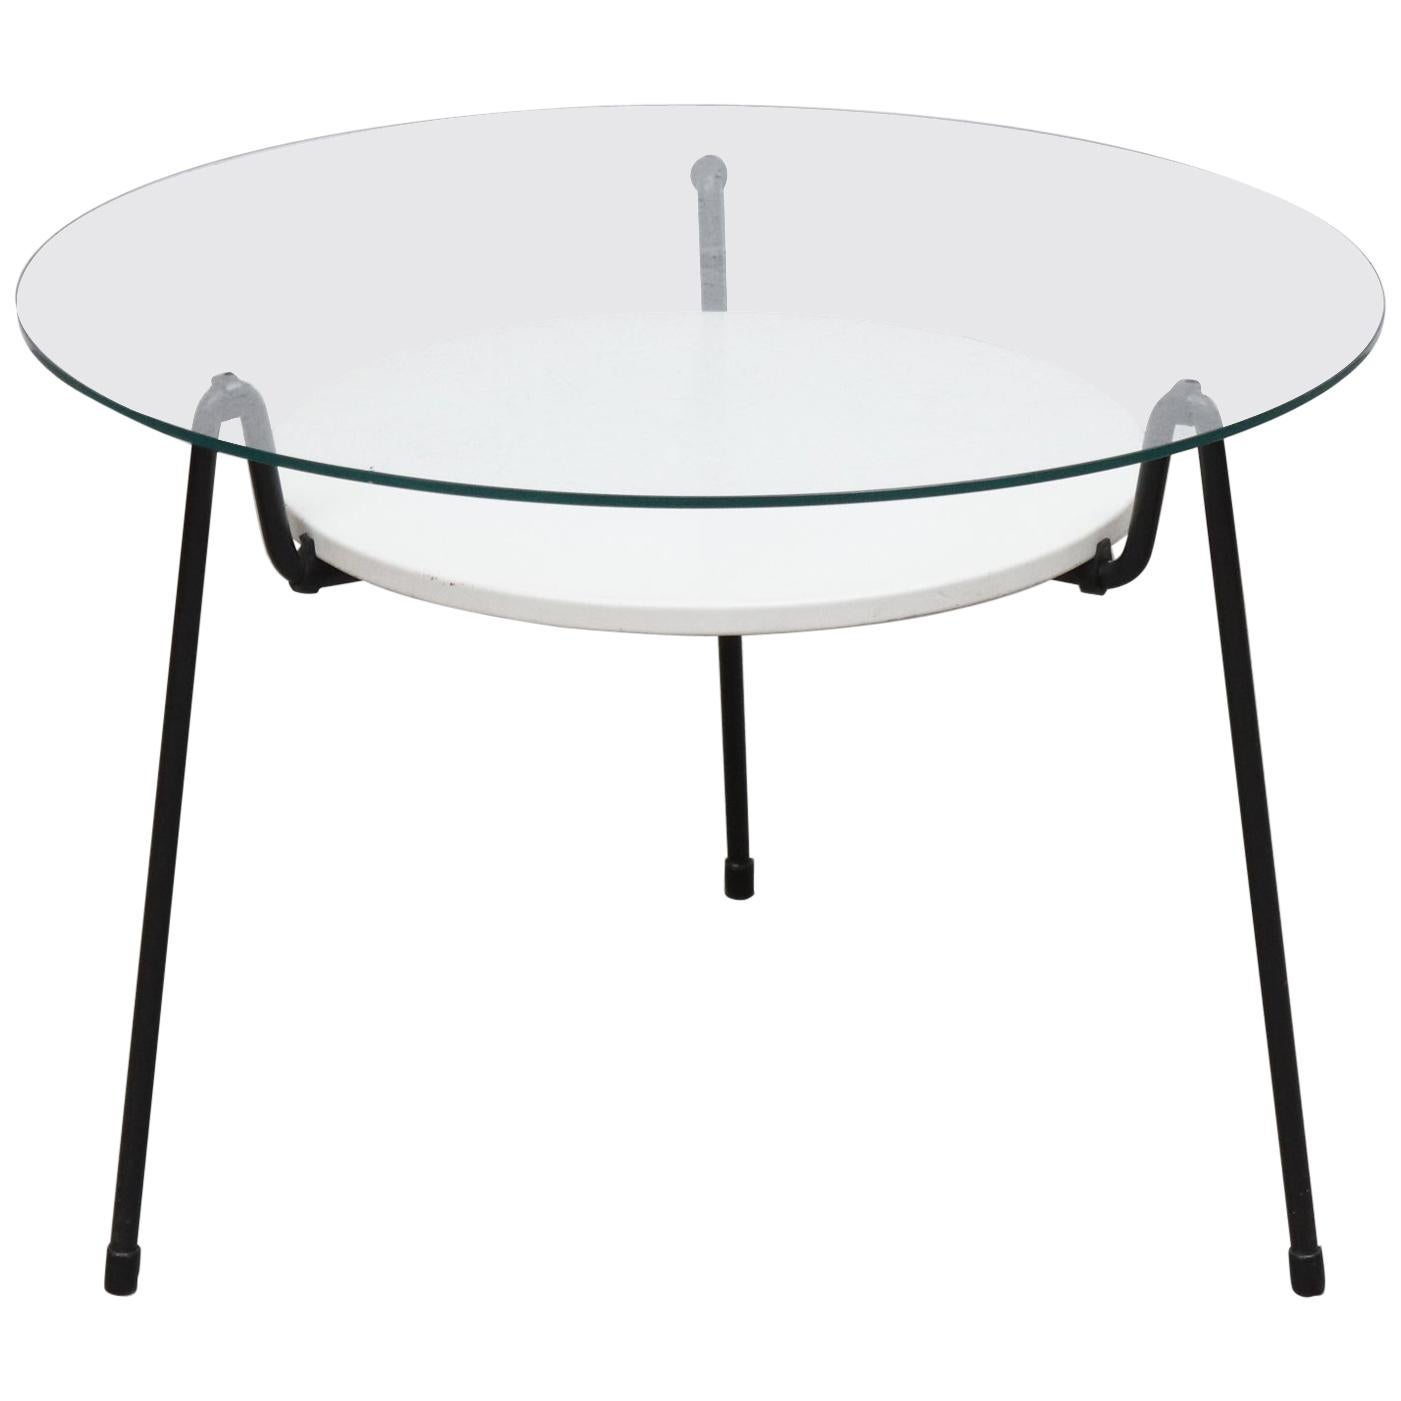 Wim Rietveld  535 "Mosquito" Side Table